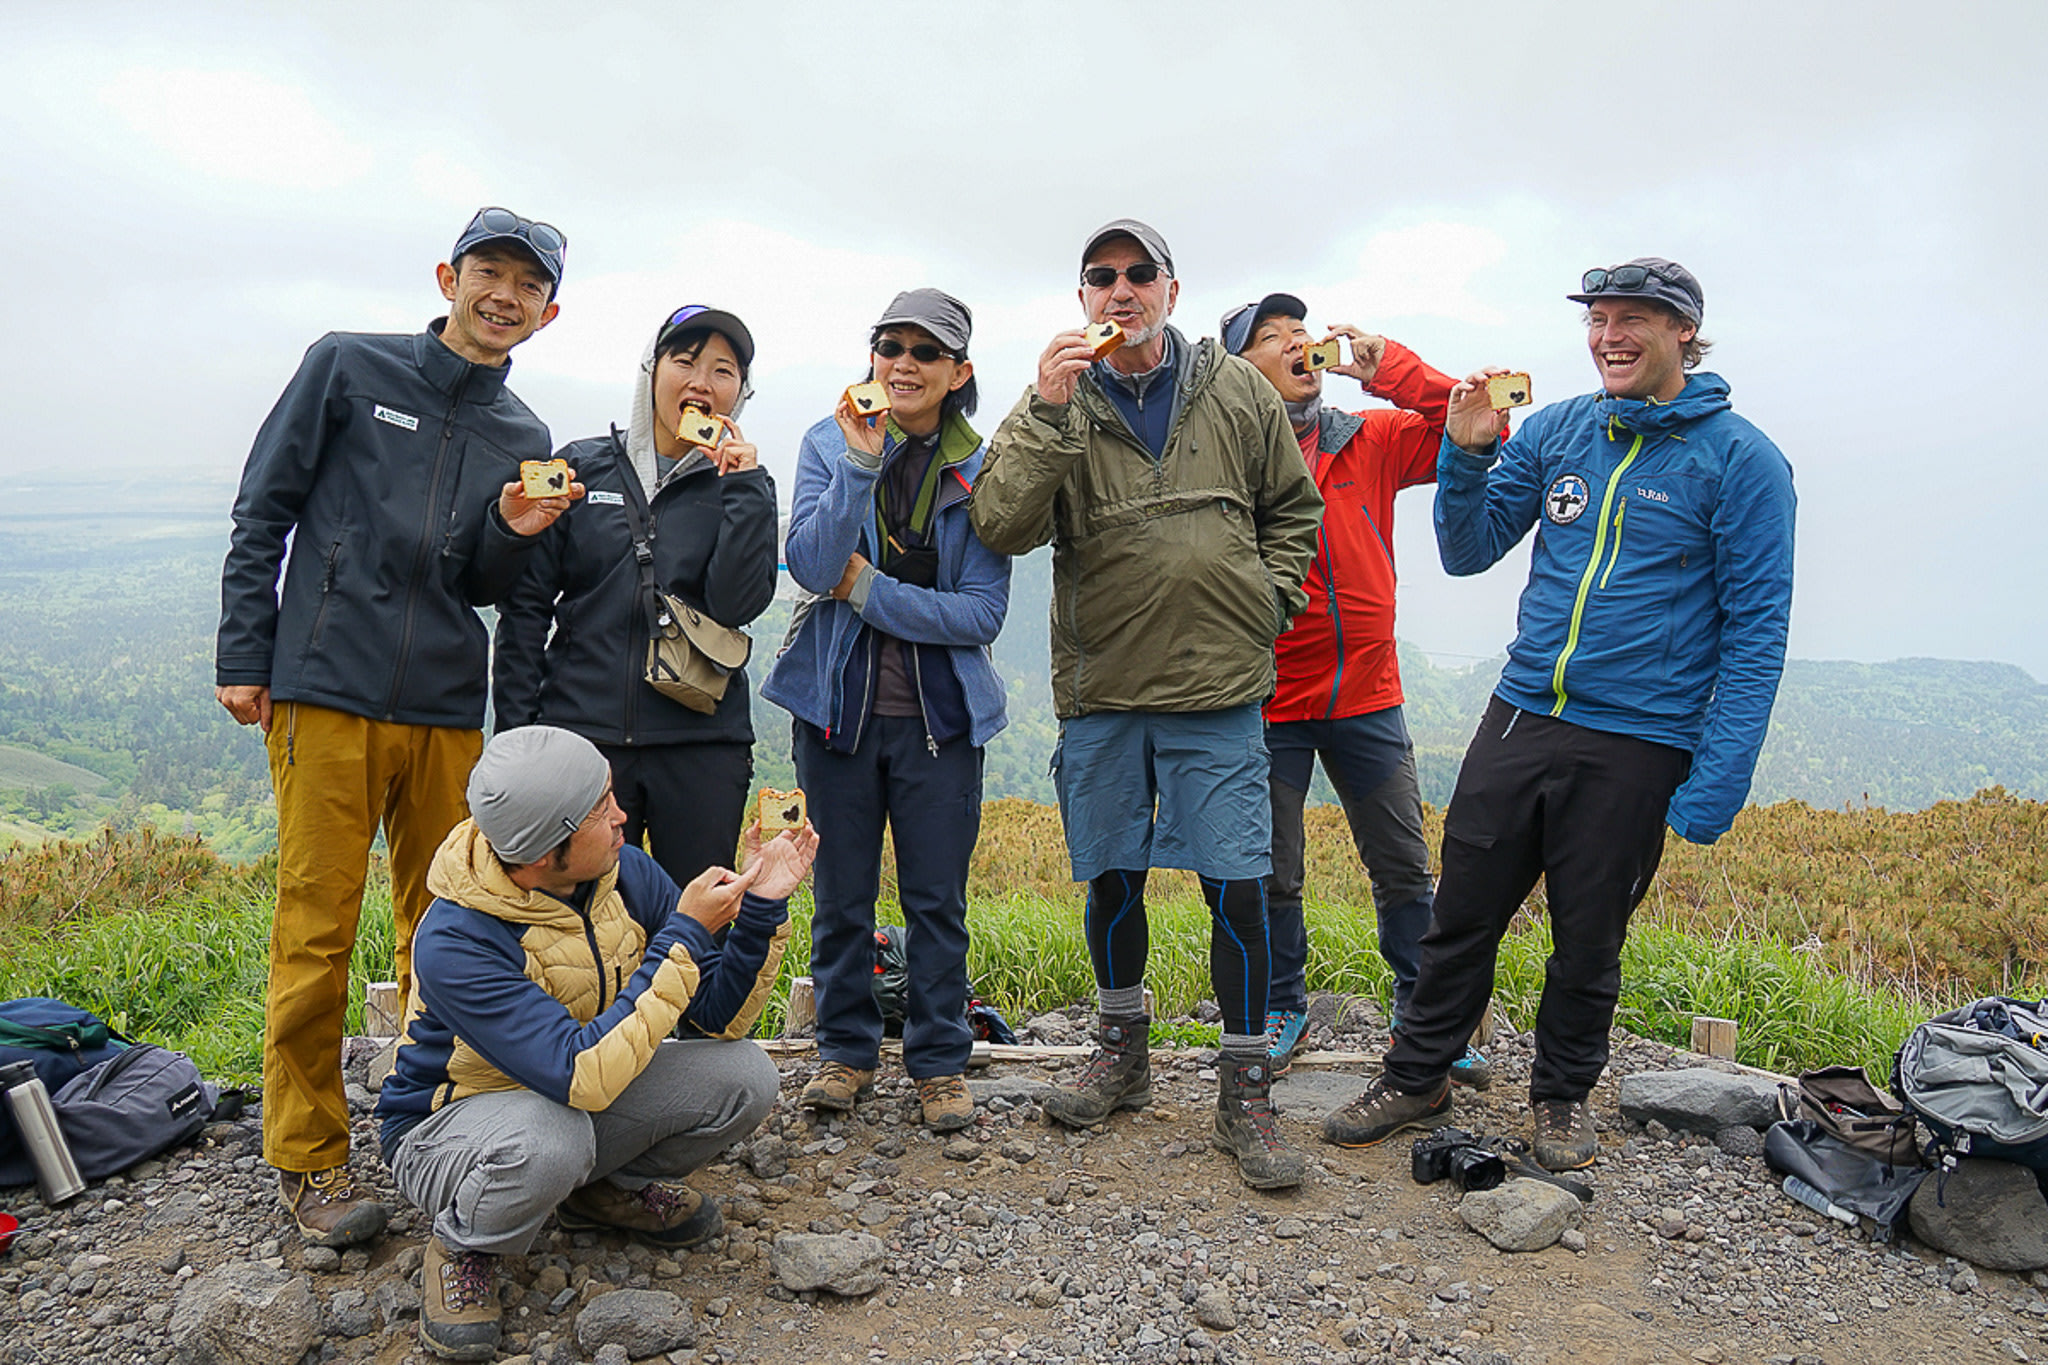 A group of hikers at the summit of a mountain all hold up a piece of cake to show the camera. The cake has a heart shape running through it.